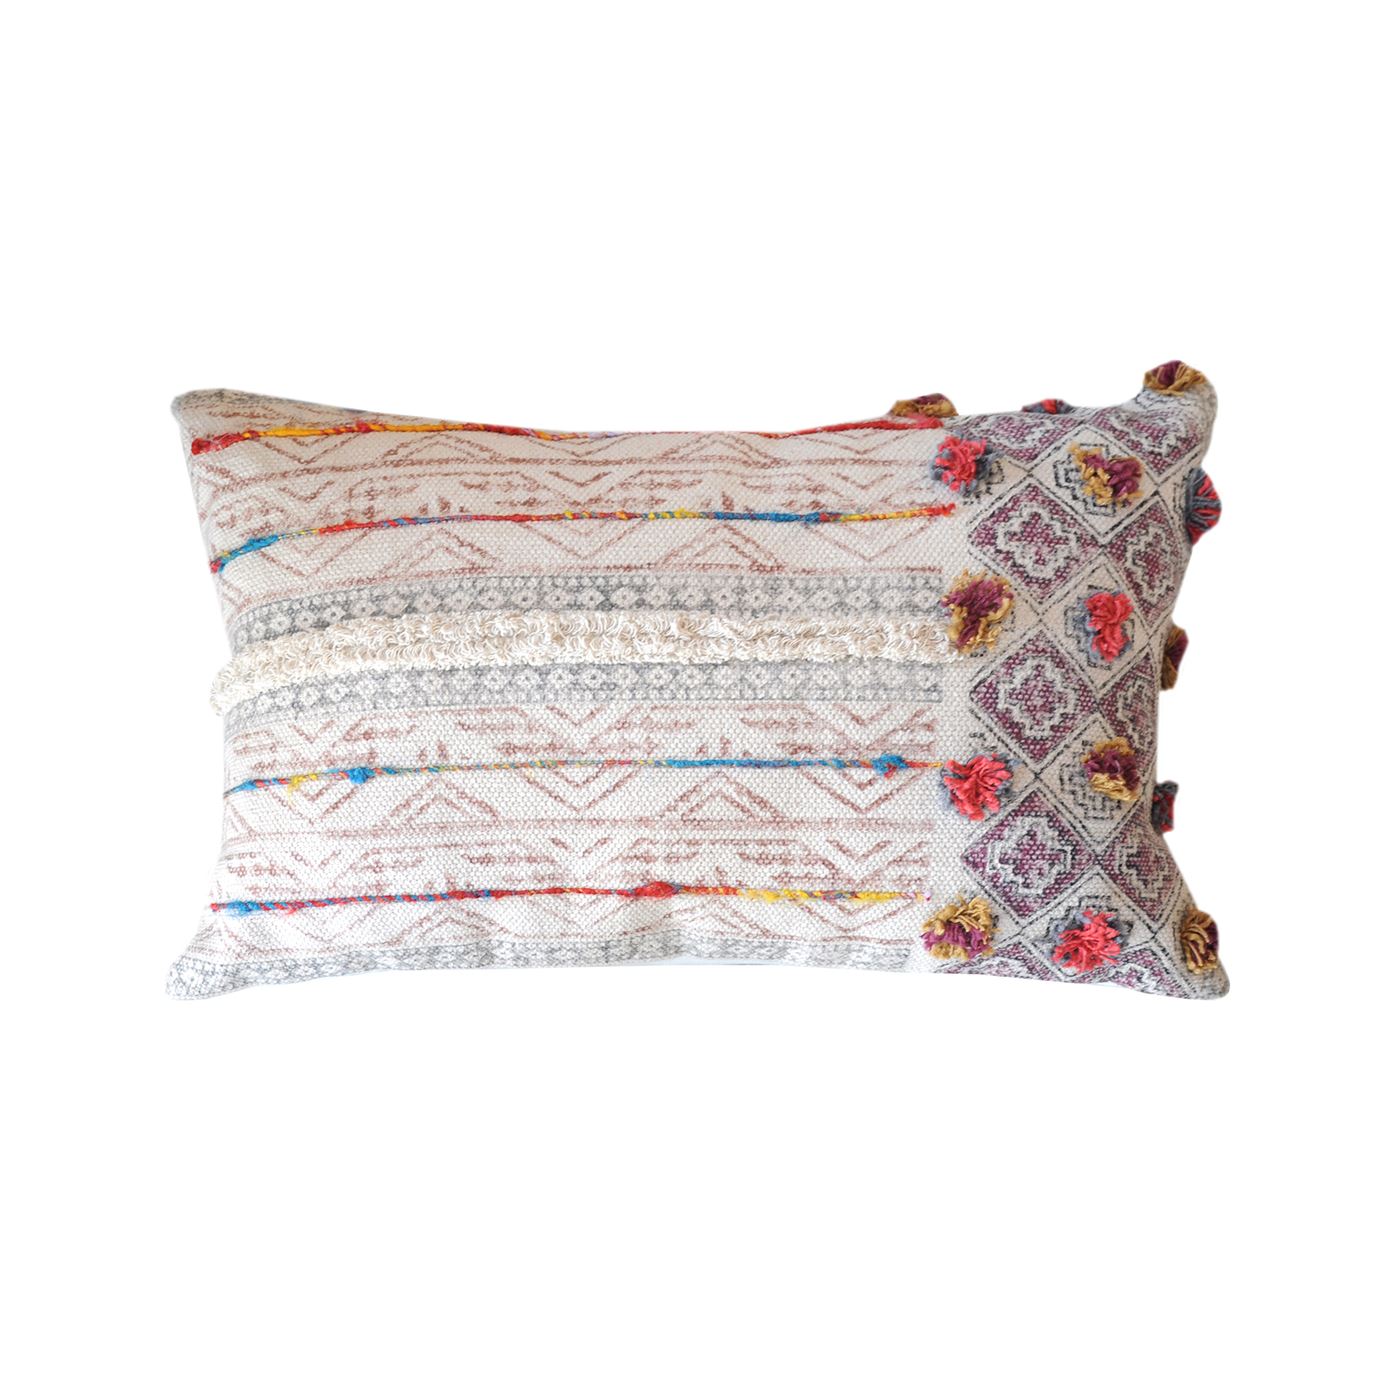 Adono Pillow, Cotton, Printed, Polyester, Multi, Pitloom, All Cut